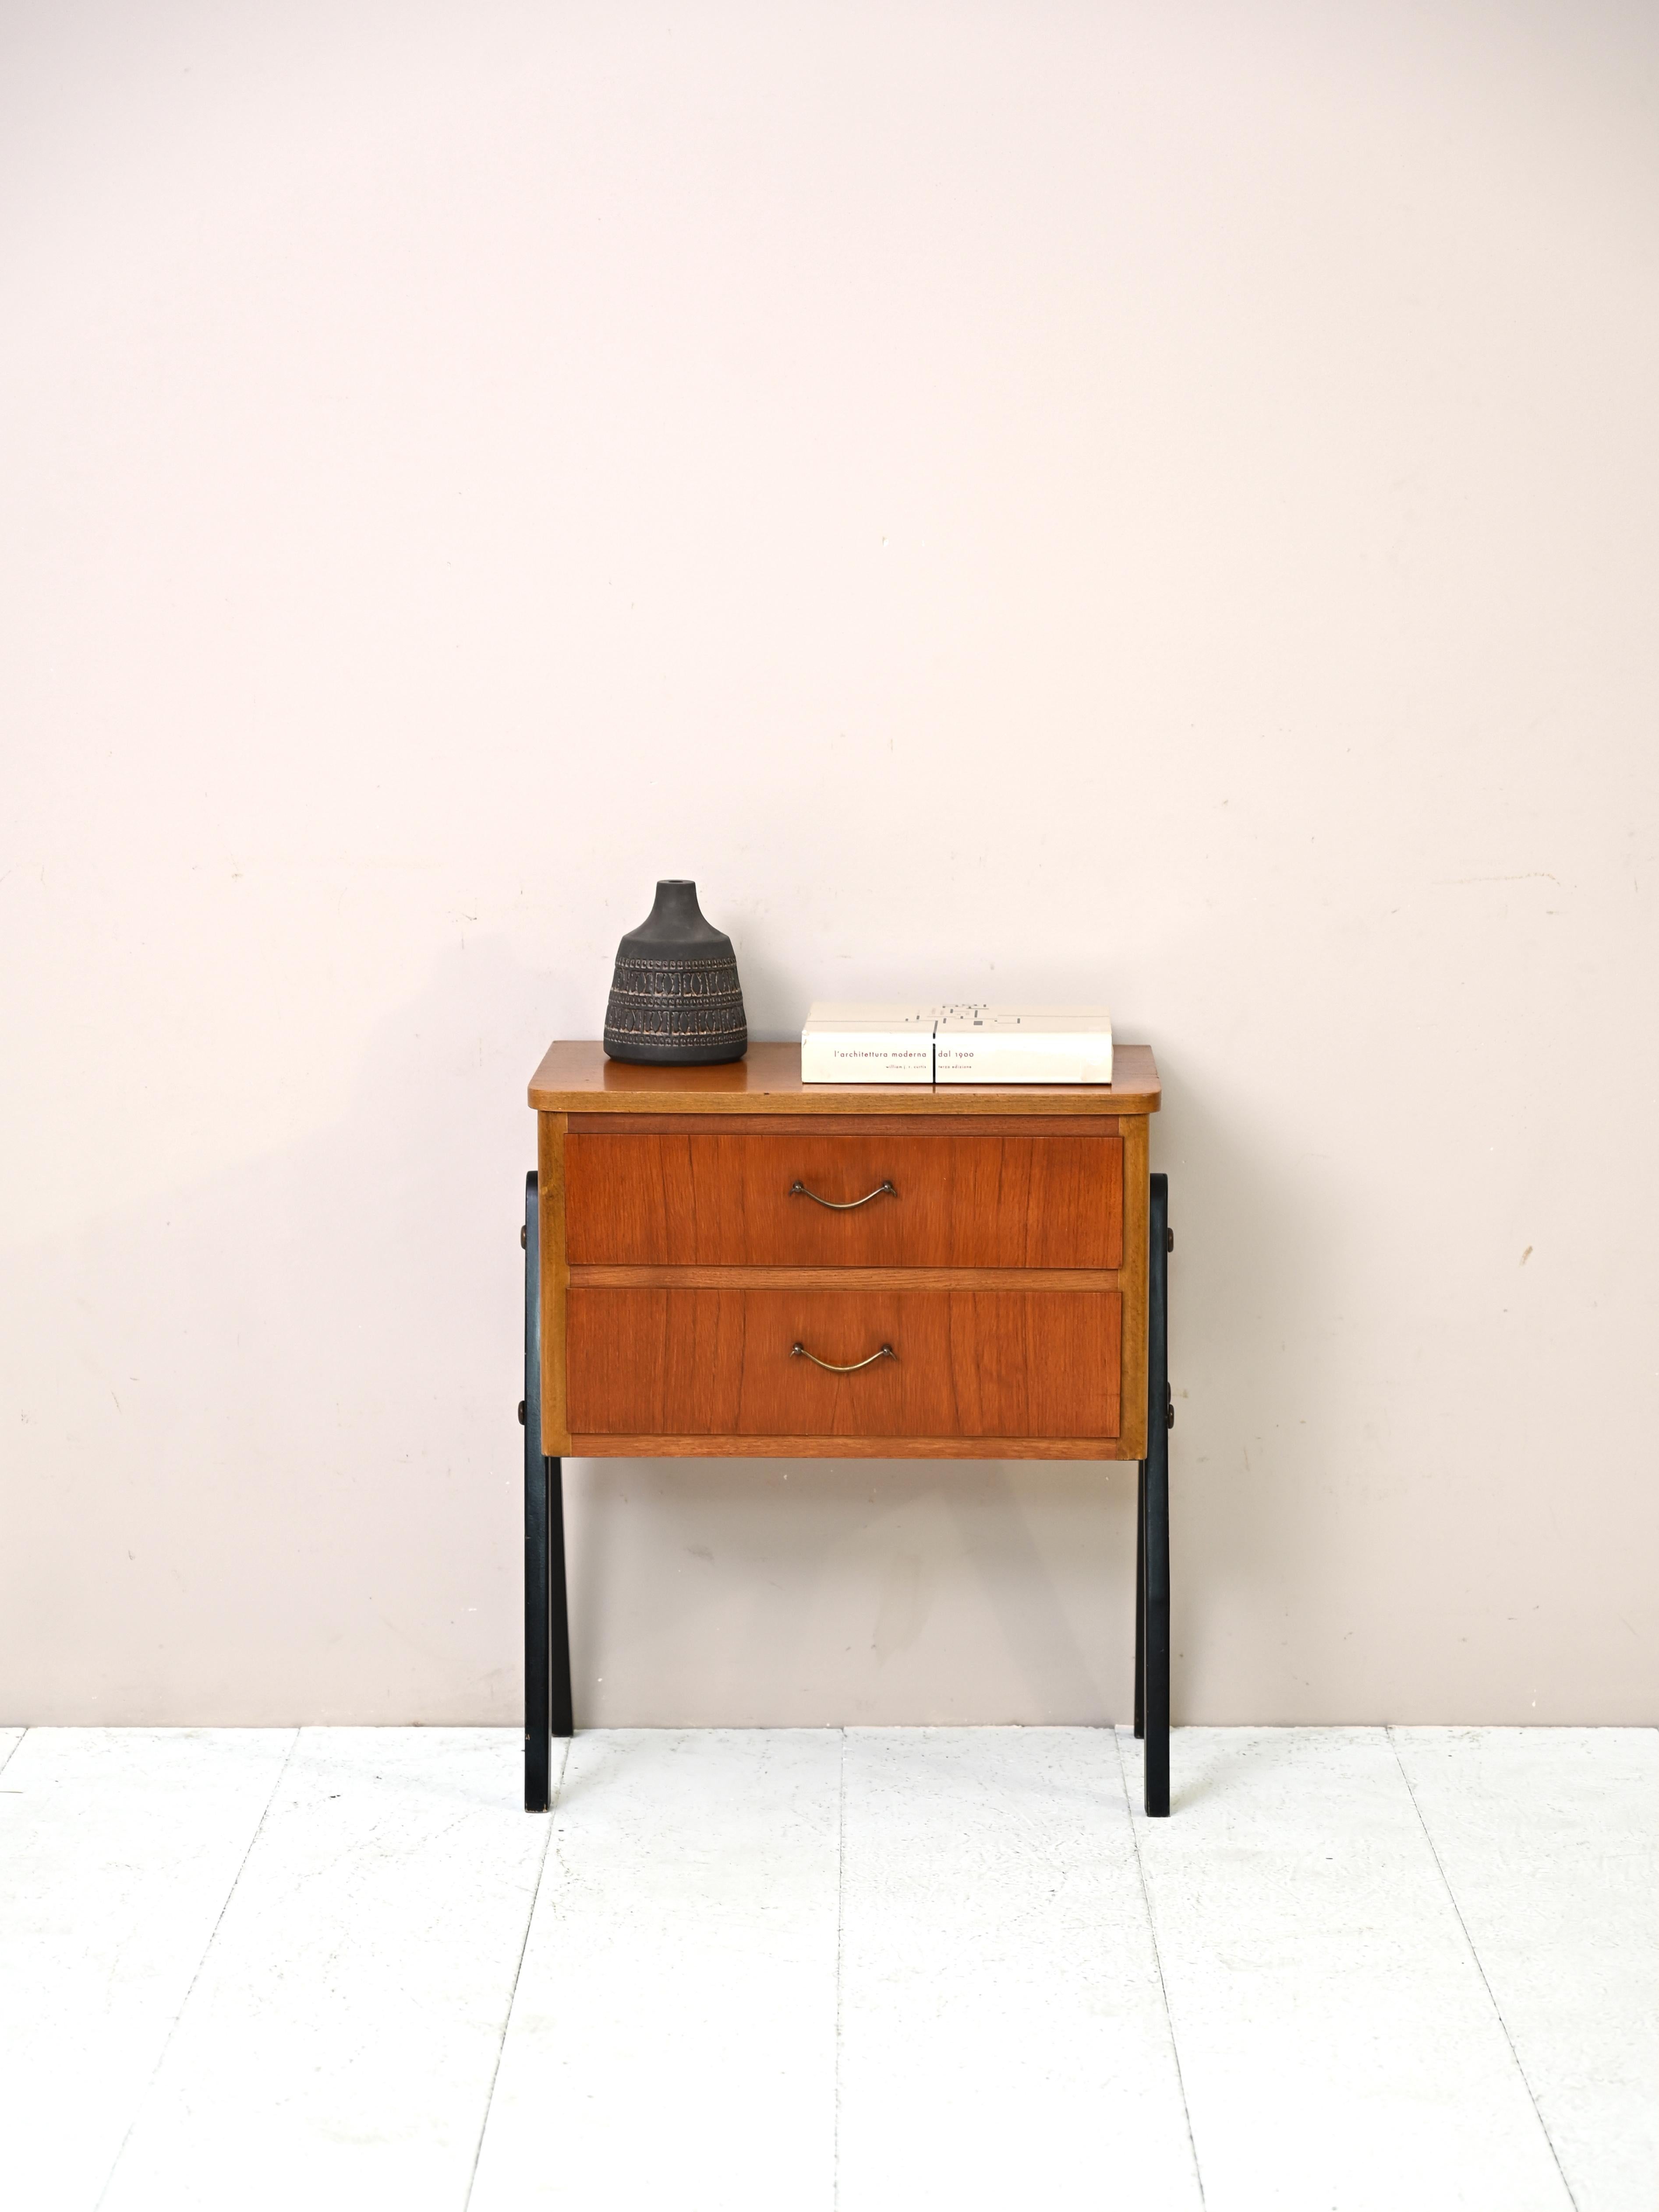 Small teak wood chest of drawers with typical mid-century Scandinavian shapes.

The stem consists of two drawers that are supported by the long wooden legs painted black.

This elegant bedside table is perfect for giving a Northern European